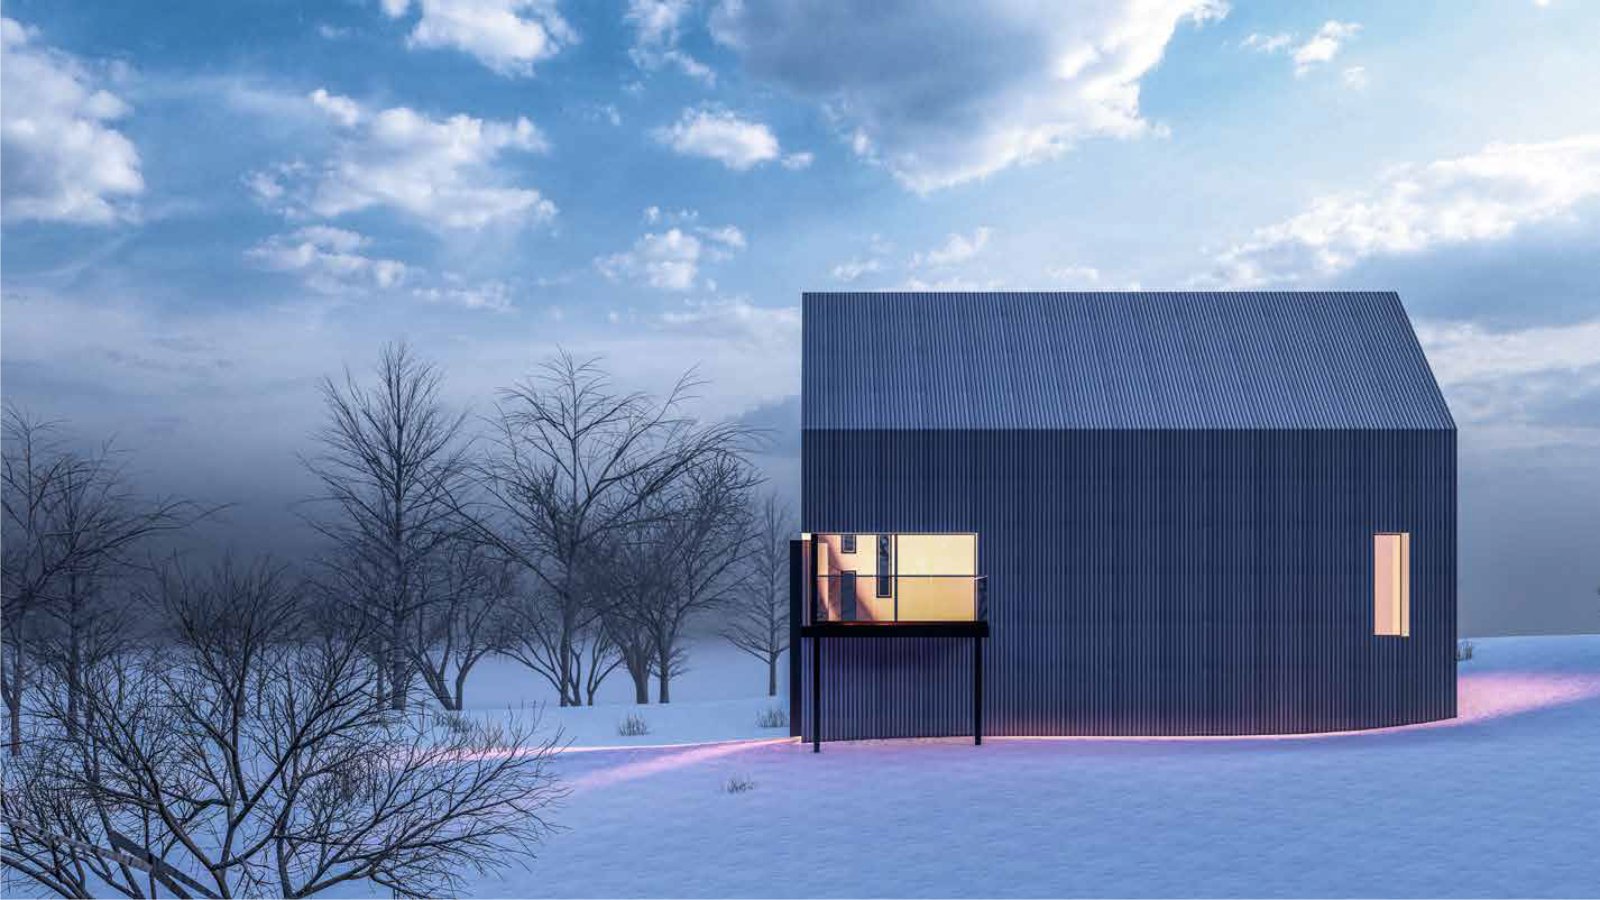 Winners Announced for “Tiny House 2022 Architecture Competition”